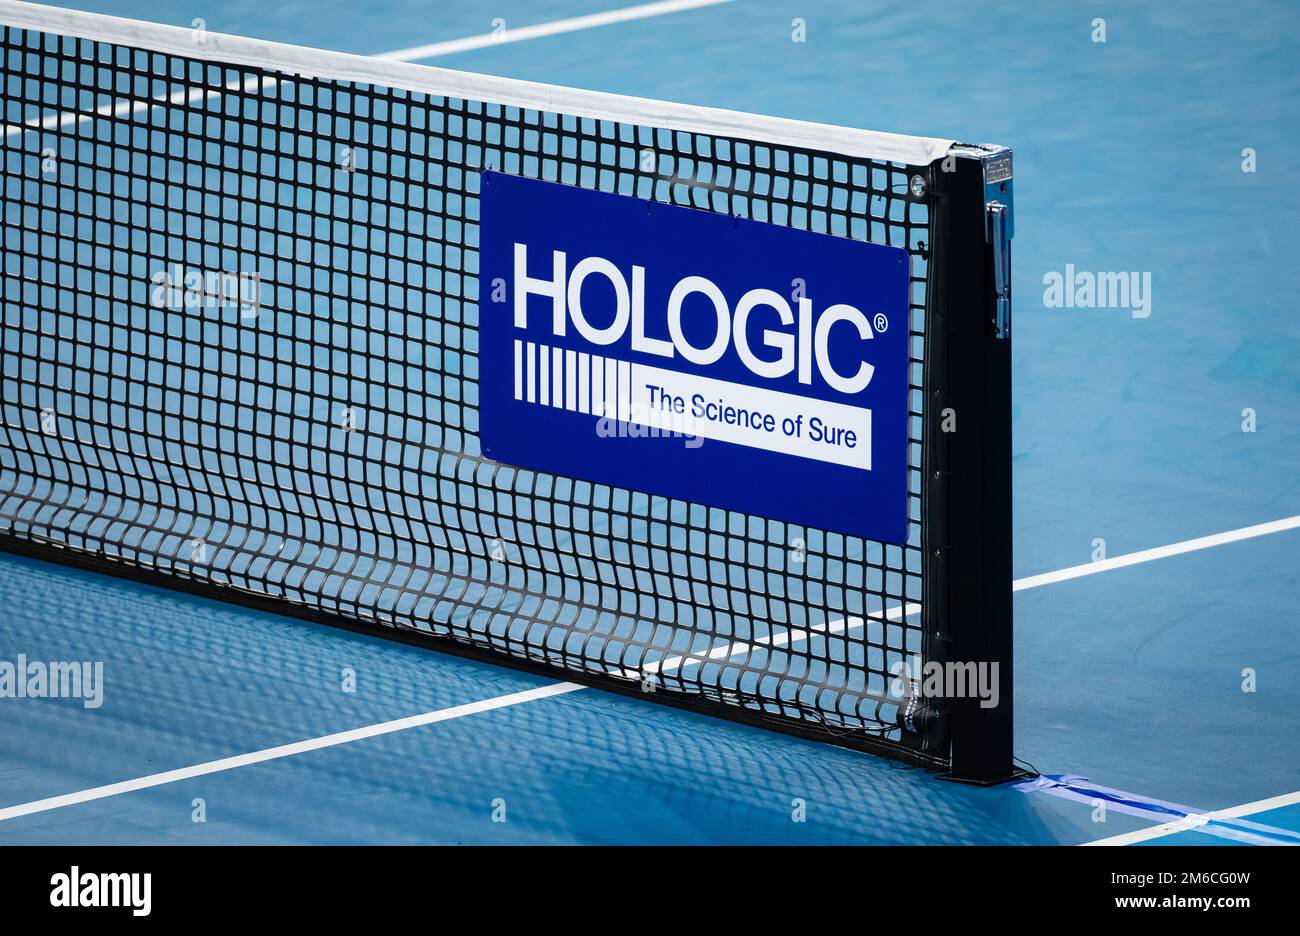 Hologic Logo at the 2023 United Cup Brisbane tennis tournament on